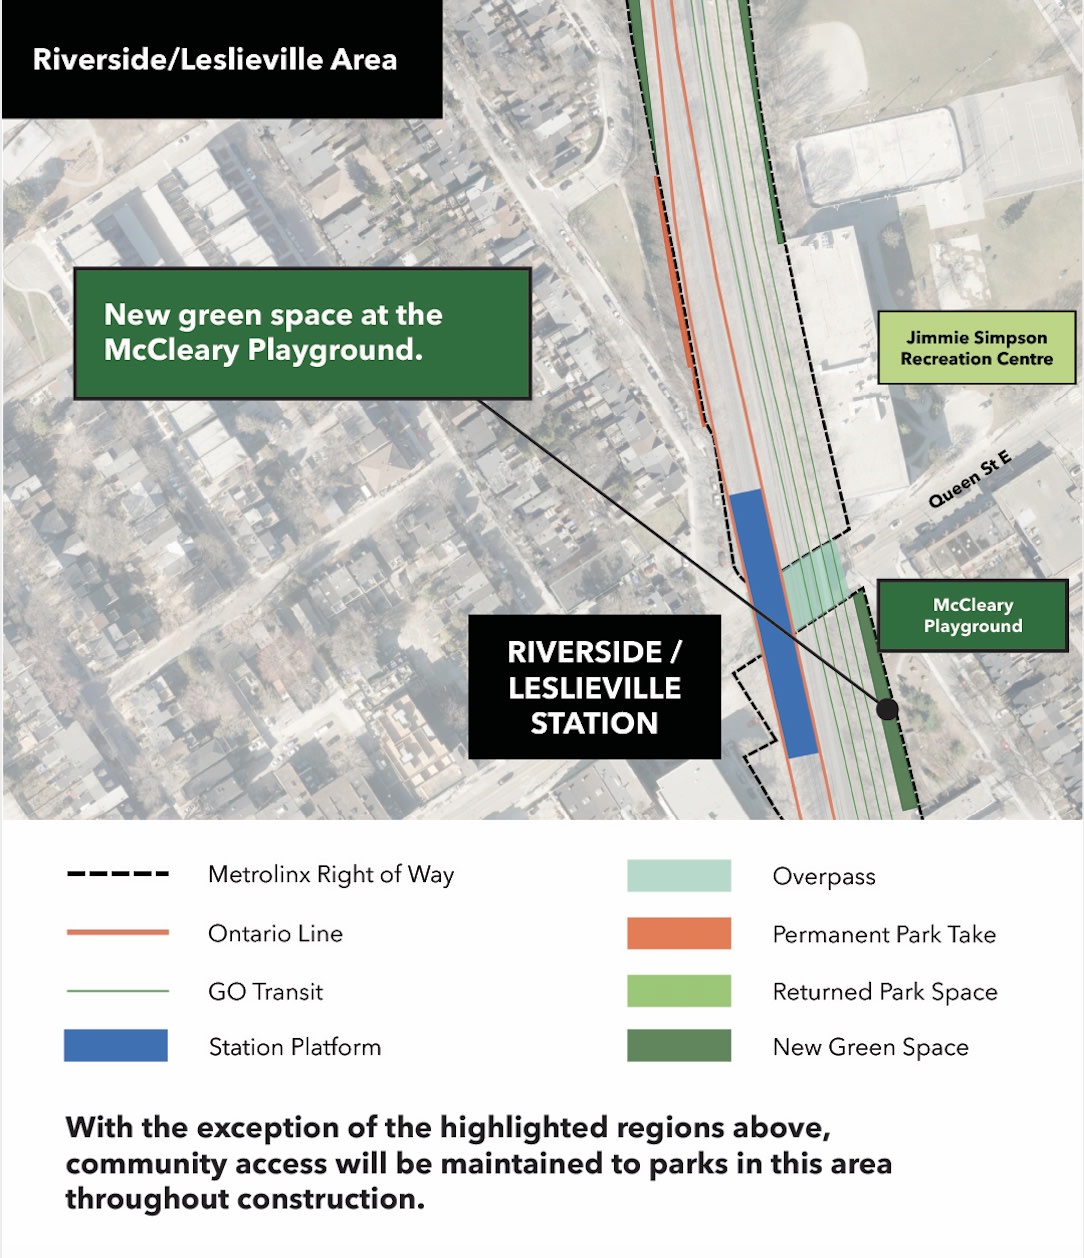 graphic showing permanent park take and new park space at McCleary playground and Jimmie Simpson